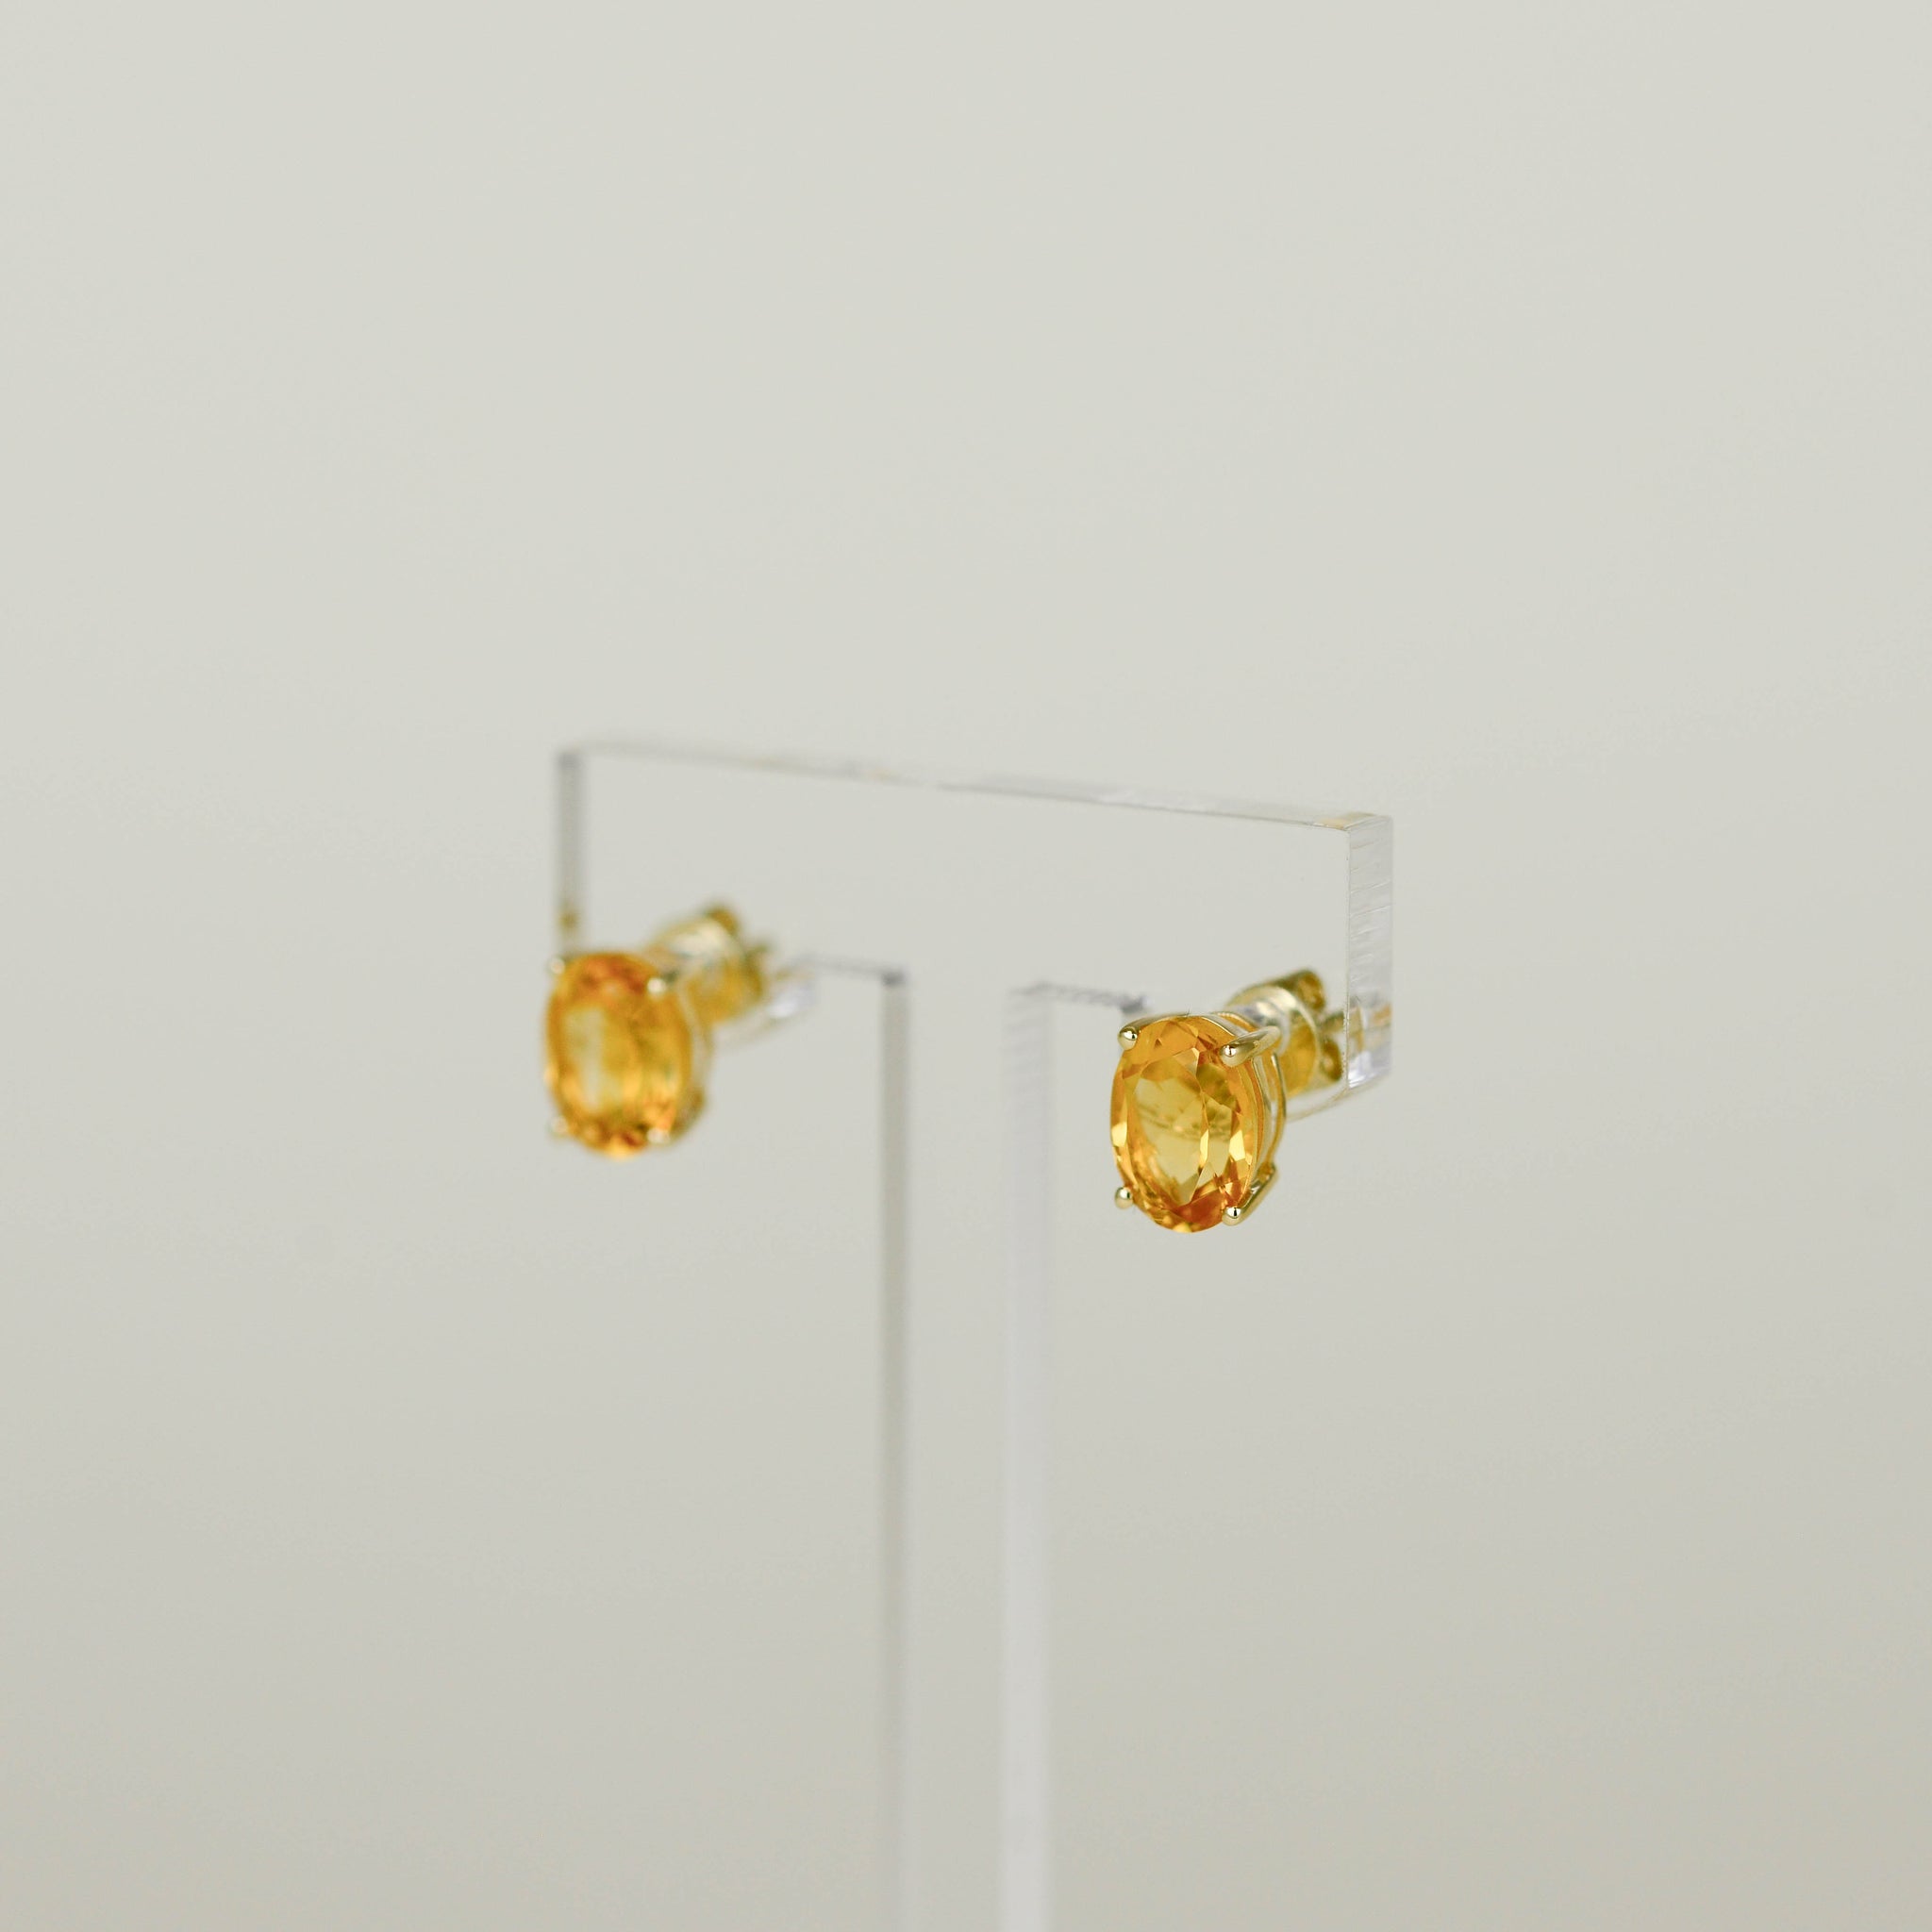 9ct Yellow Gold 2.36ct Oval Cut Citrine Stud Earrings